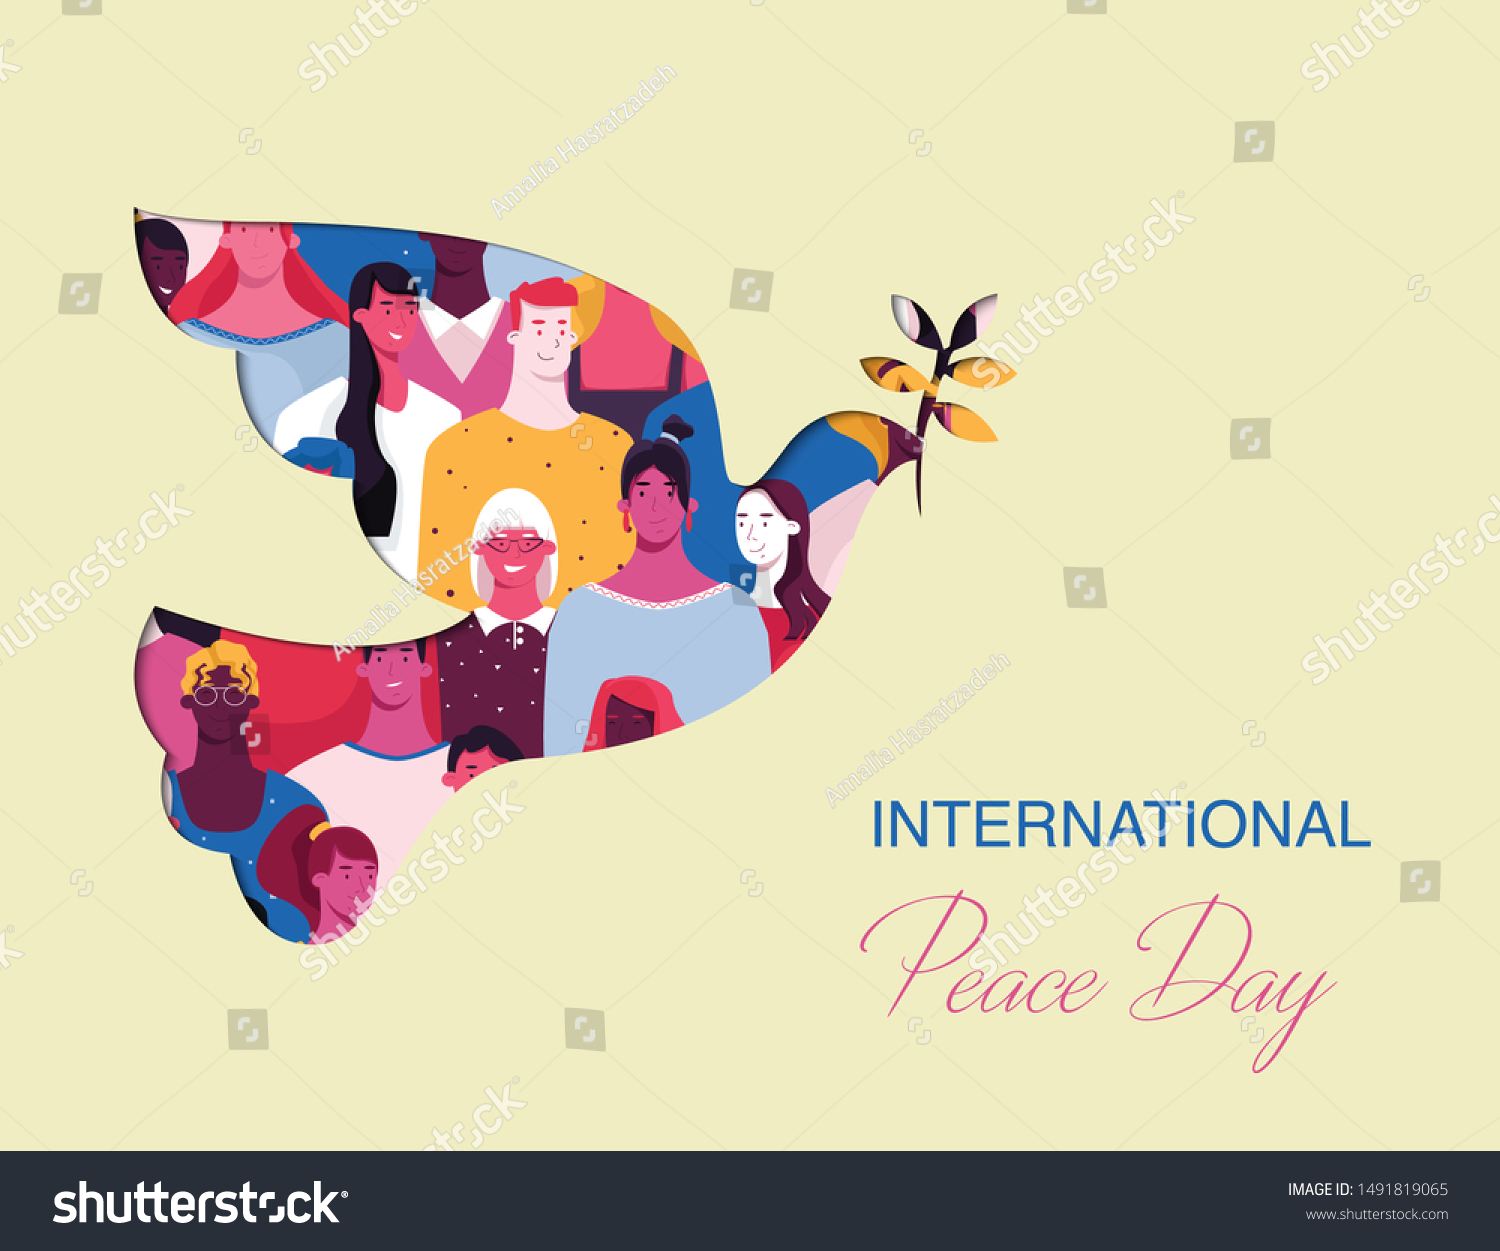 Happy Peace Day. Peace Day Greeting Card with Dove/Pigeon and Calligraphy Writing #1491819065